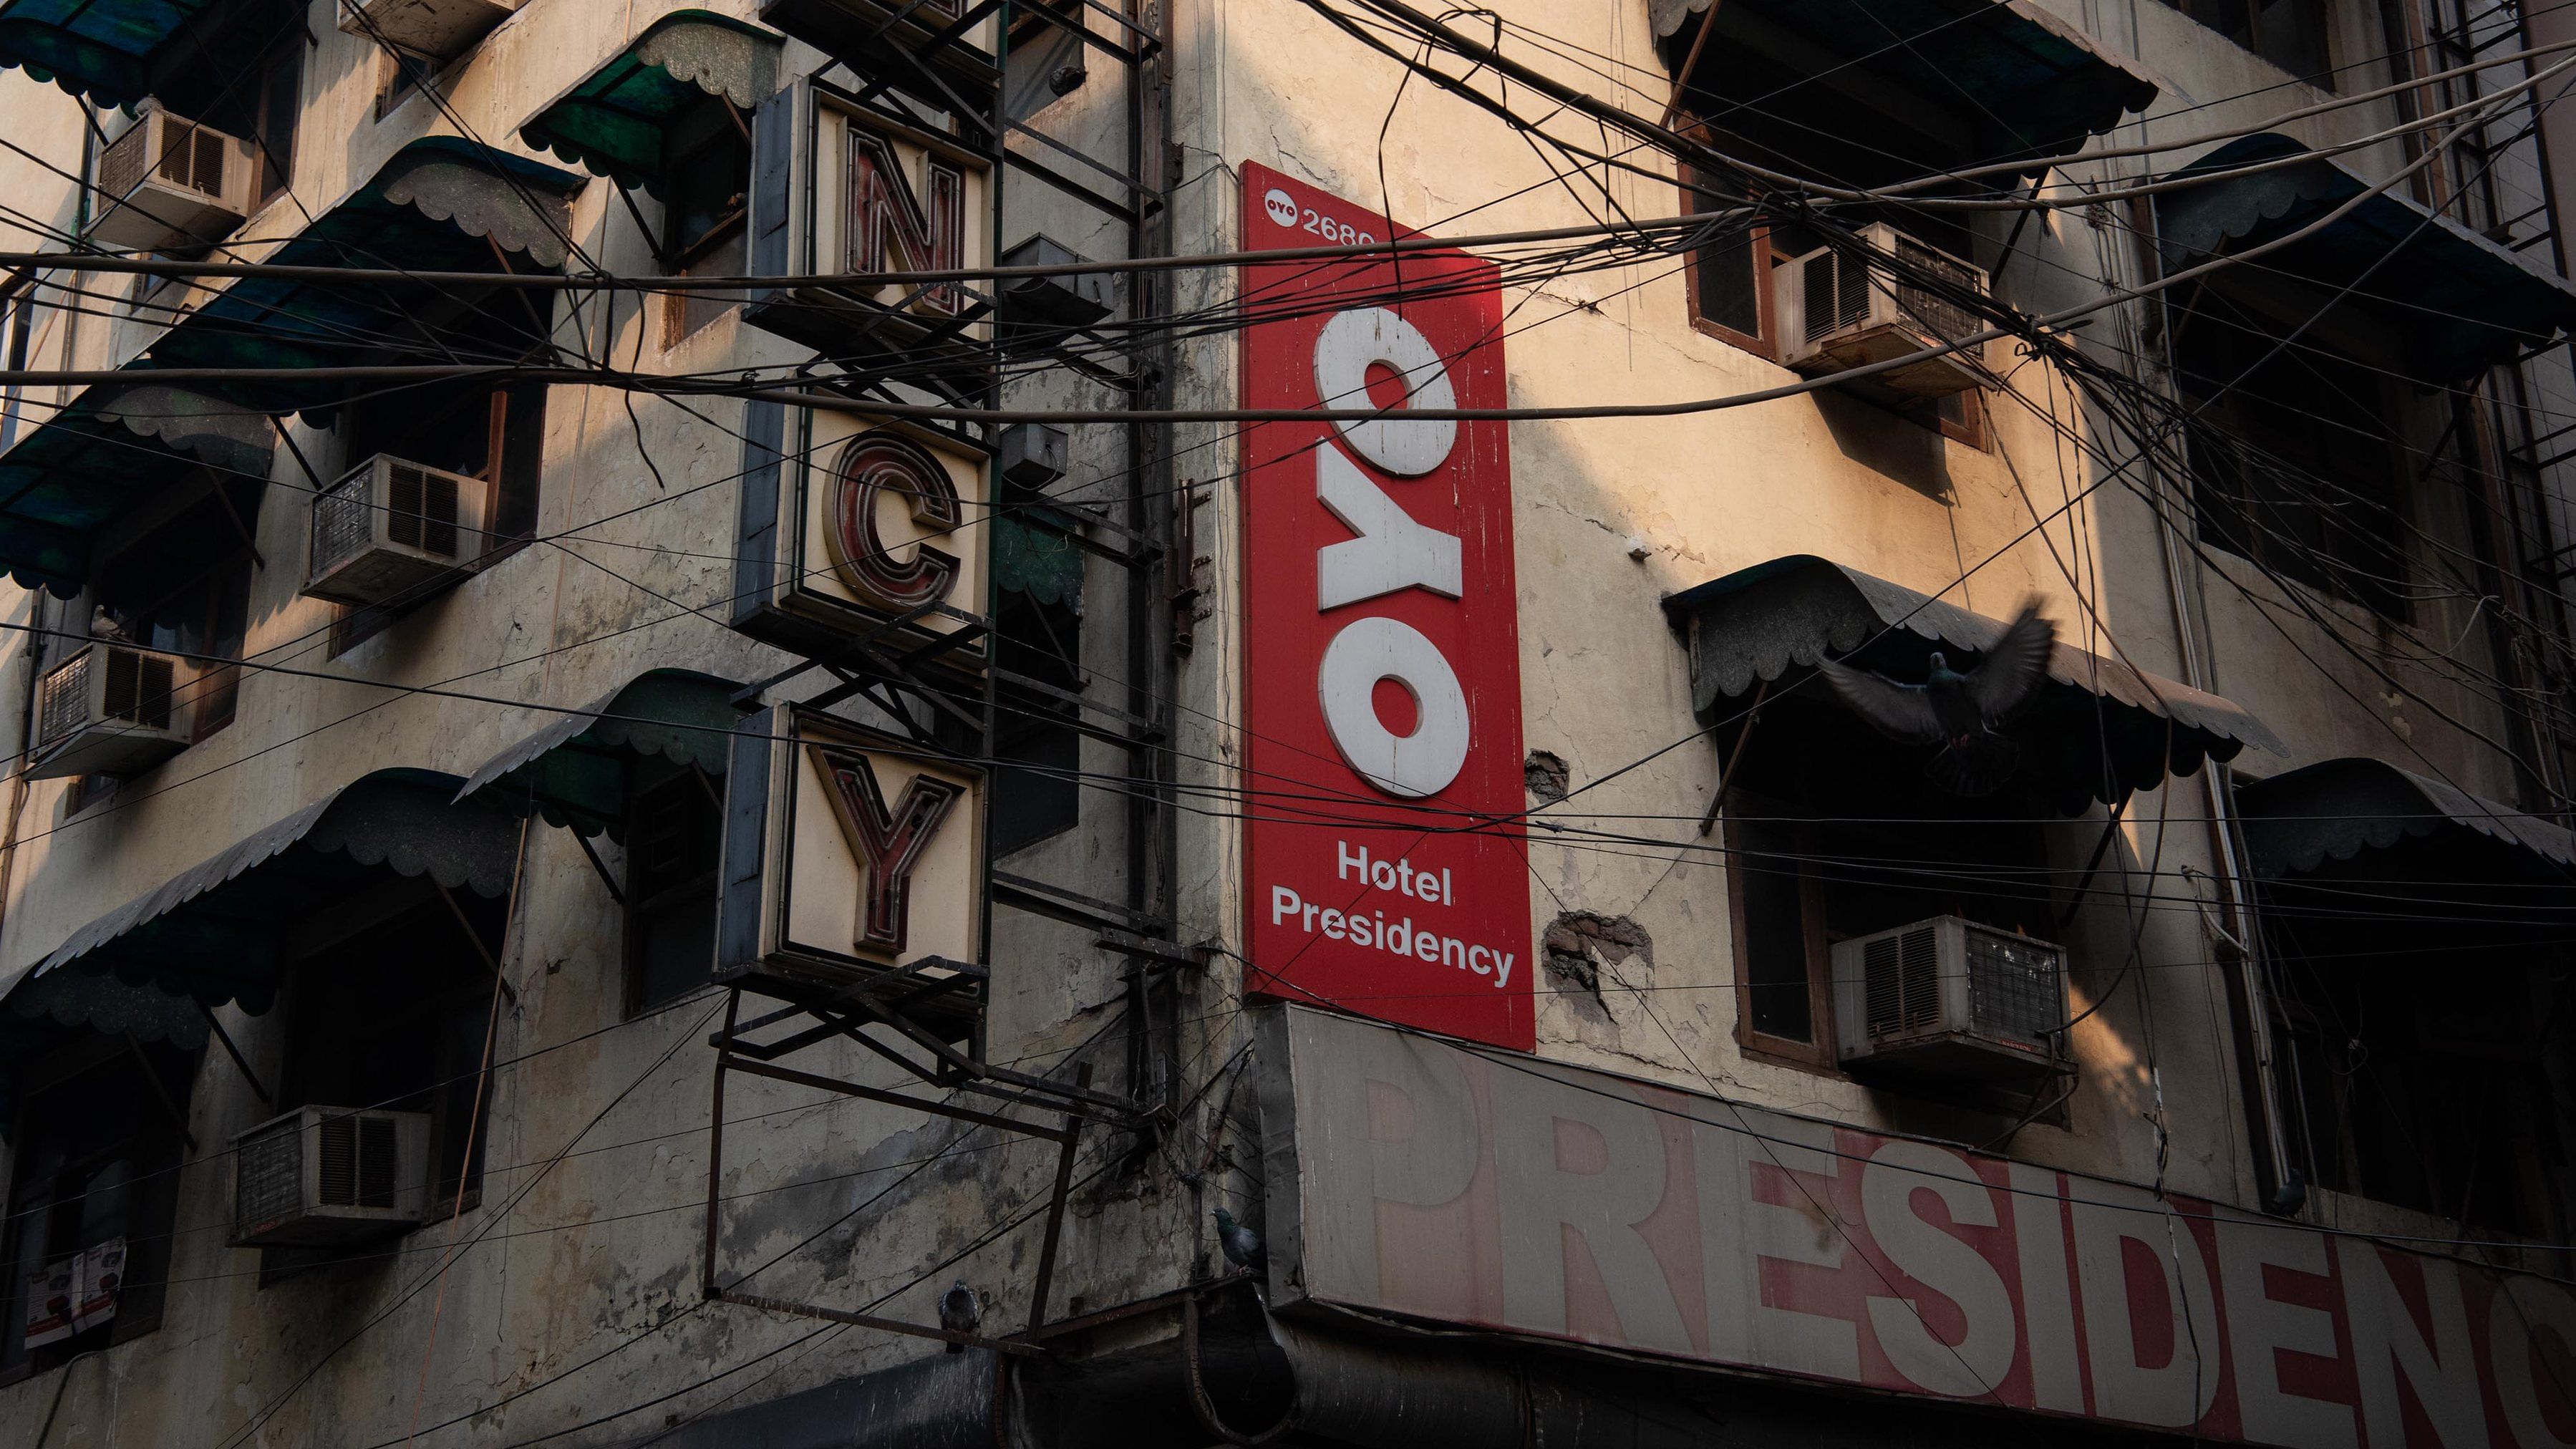 An Oyo partner property in New Delhi. Credit: The New York Times/ Saumya Khandelwal via DH archive)